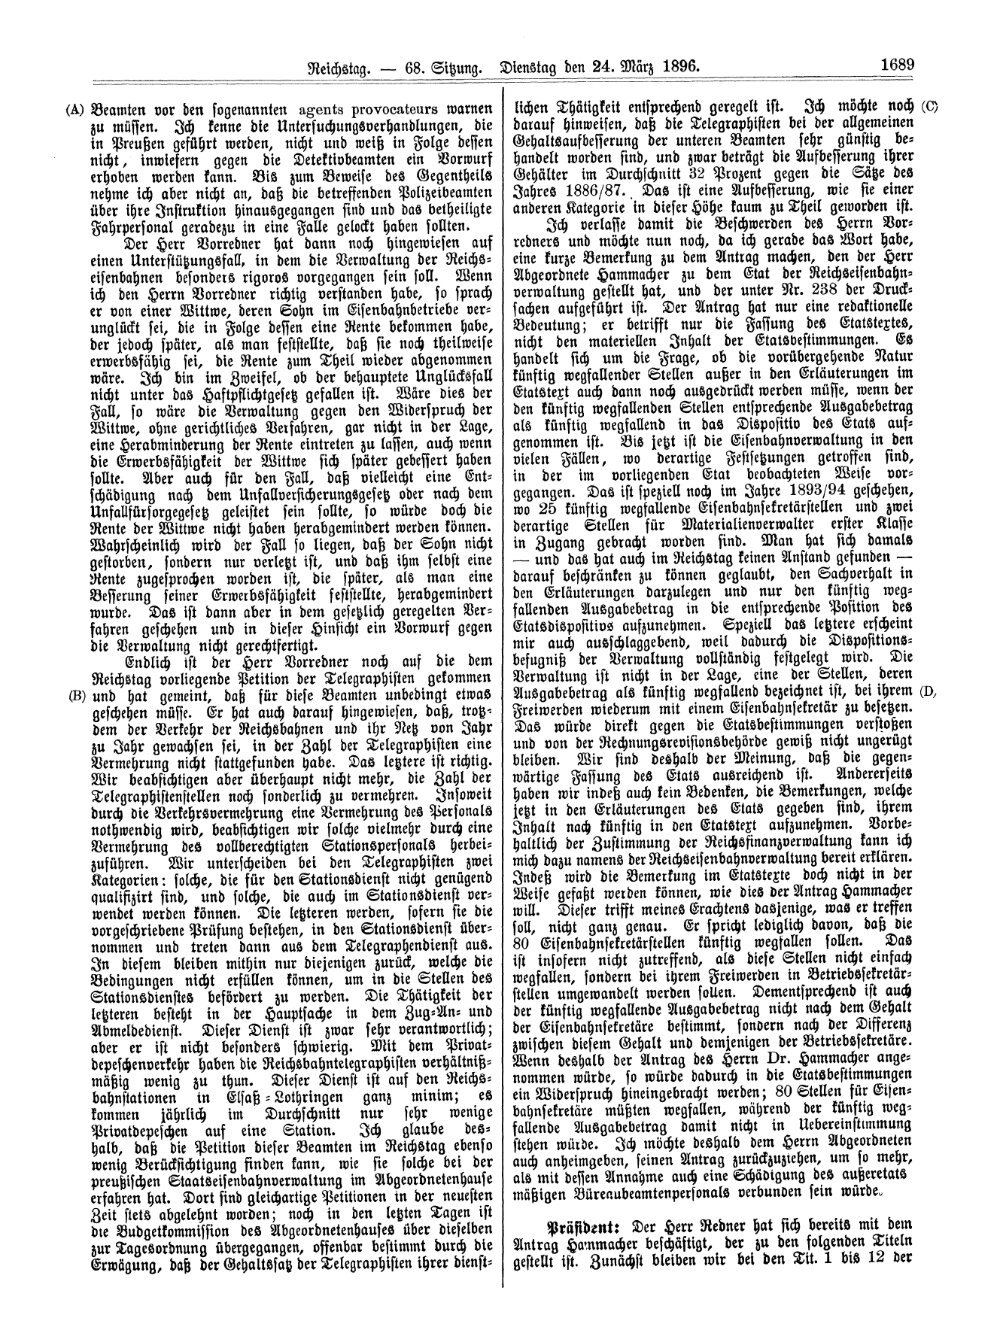 Scan of page 1689